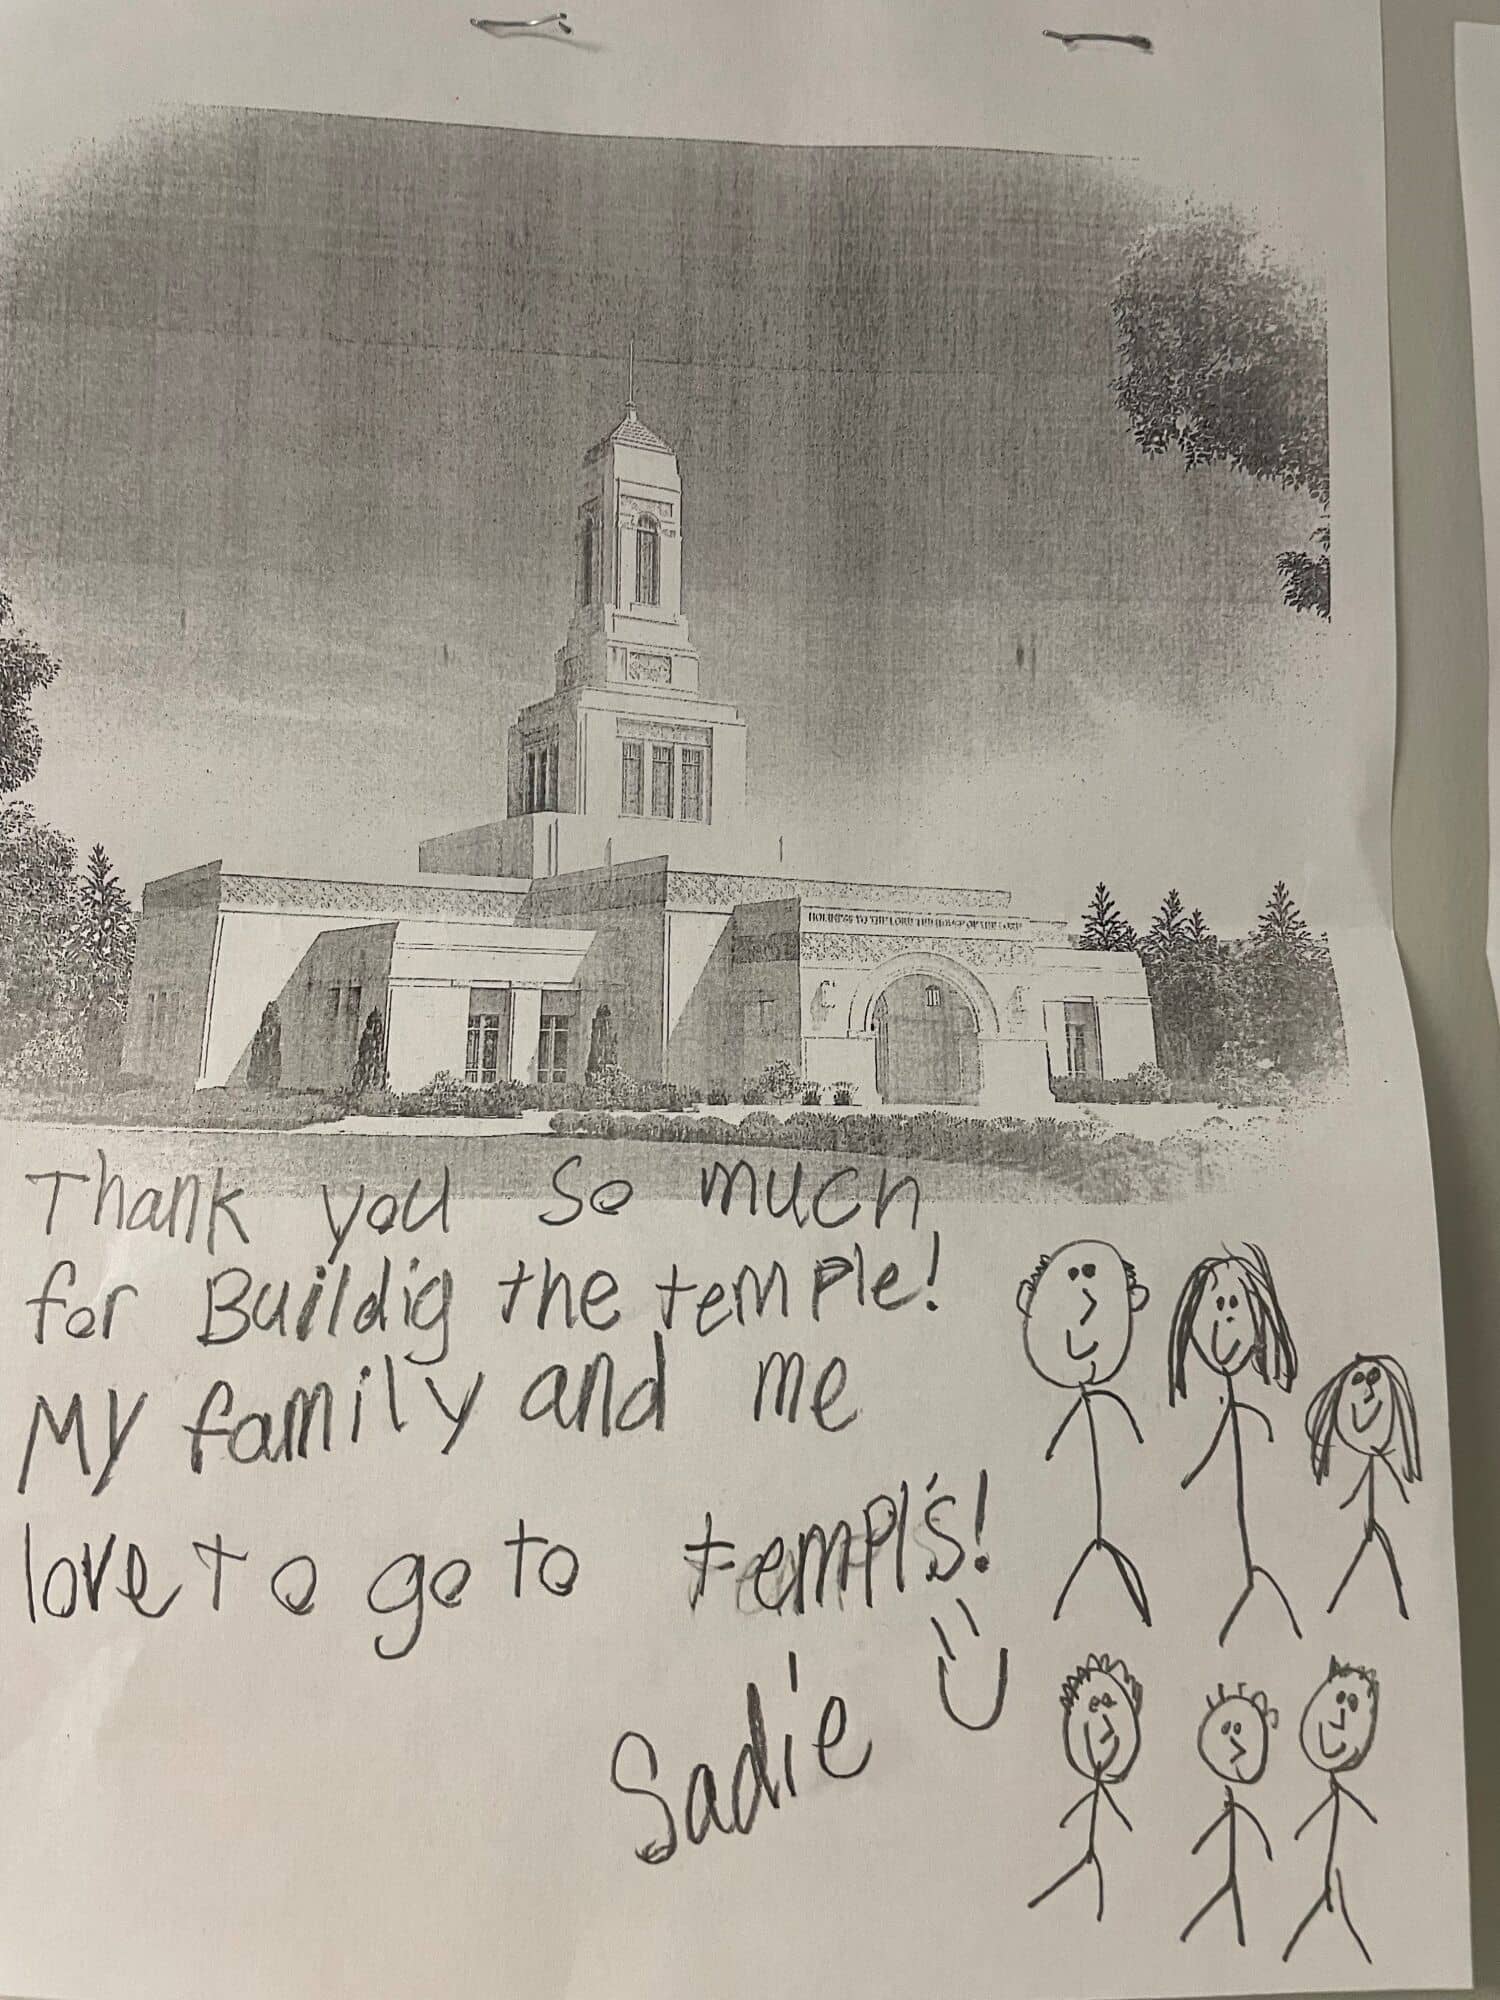 An image of the temple rendering on paper with the words "Thank you so much for building the temple! My family and me love to go to temples! Sadie."